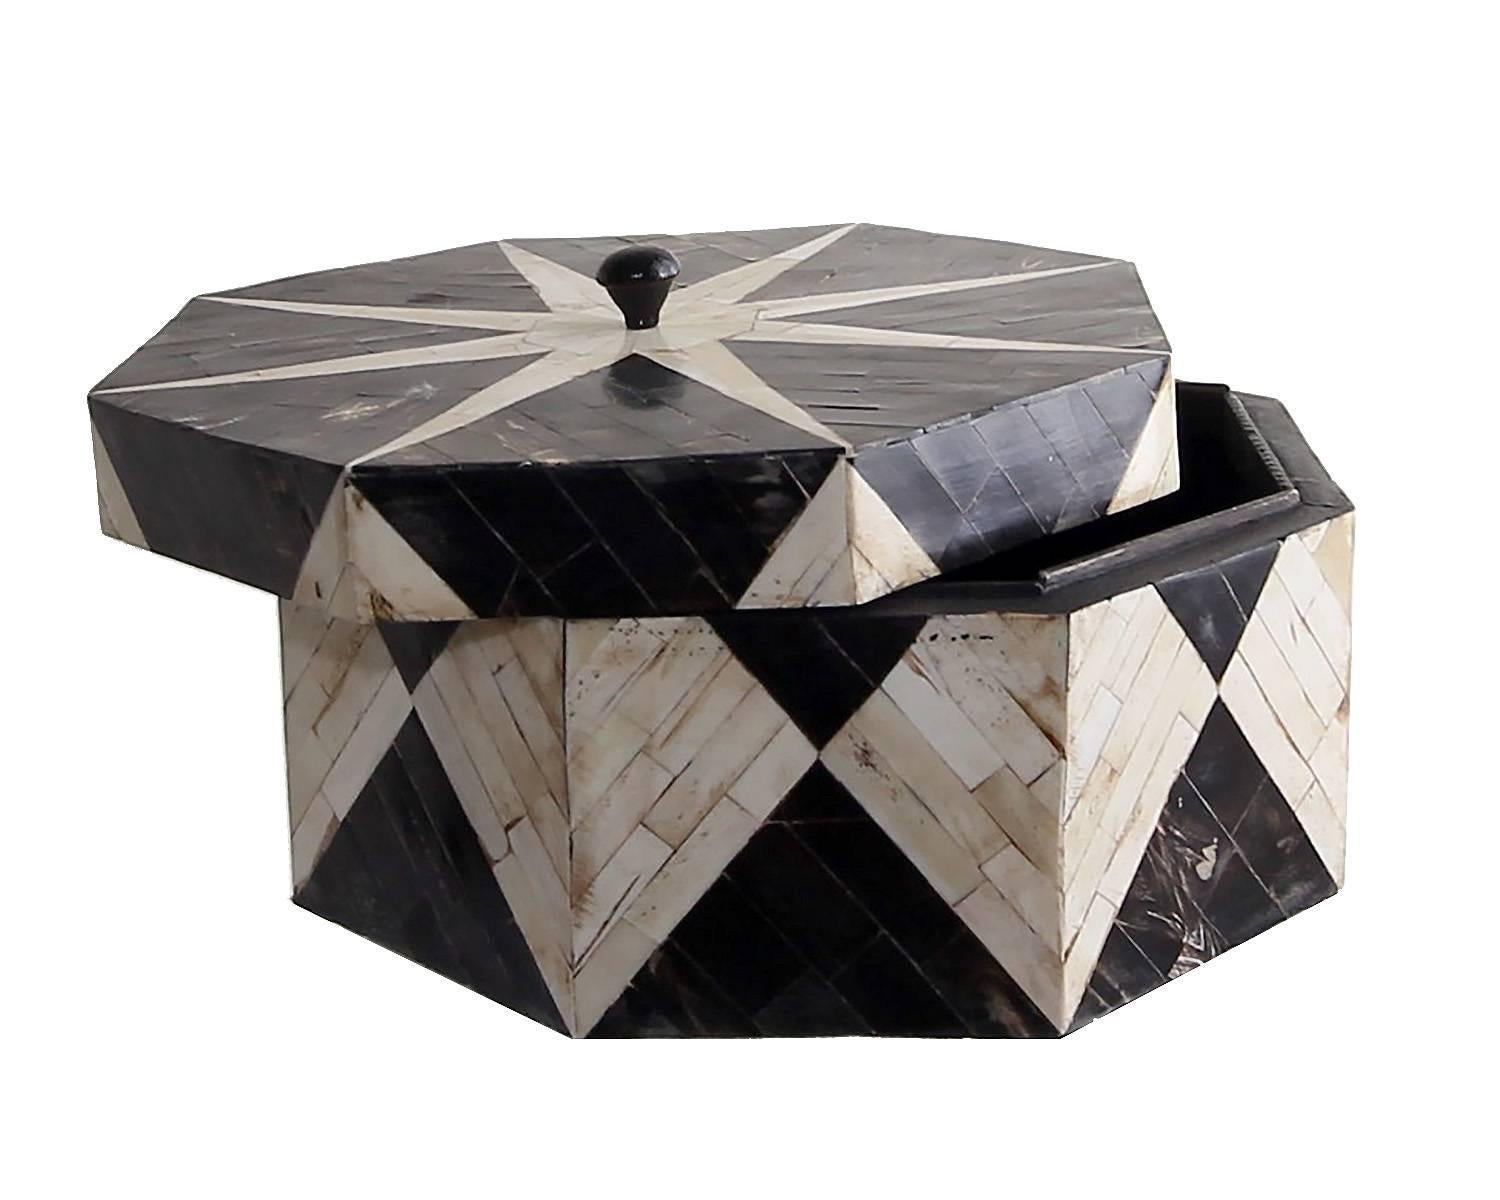 This handmade box with a beautiful star design lid presents beautifully. Handcrafted of bone and horn with great care and craftsmanship. Presents beautifully and with no chips or losses. Unmarked. Lined in black velvet.